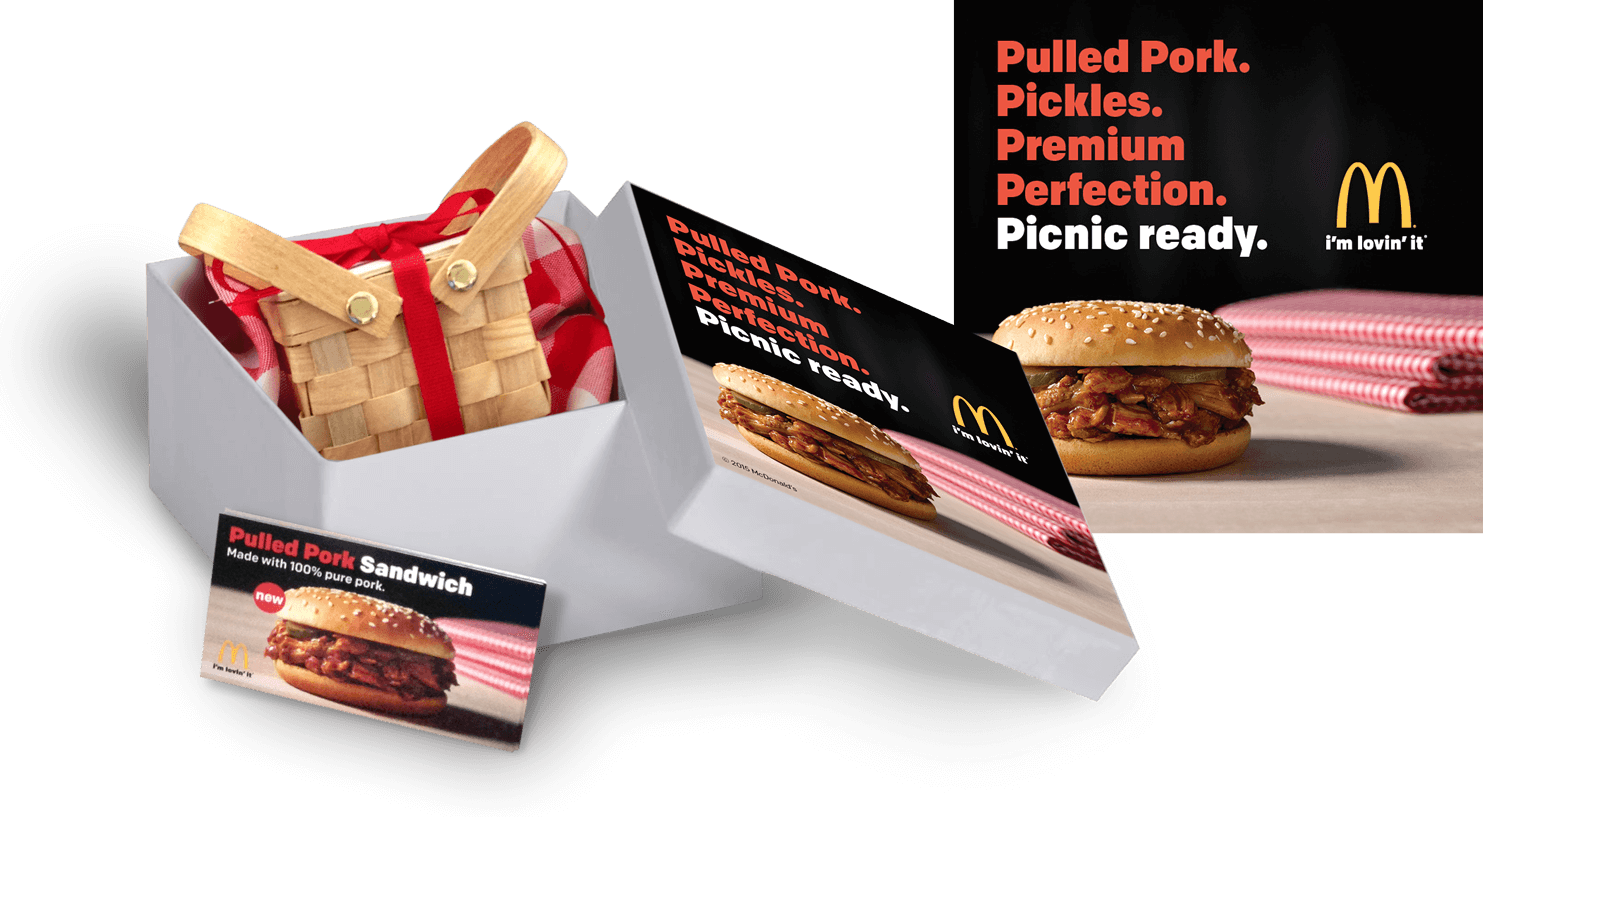 M<span class="lowercase">c</span>Donald's <strong>Pulled Pork Media Kit</strong>